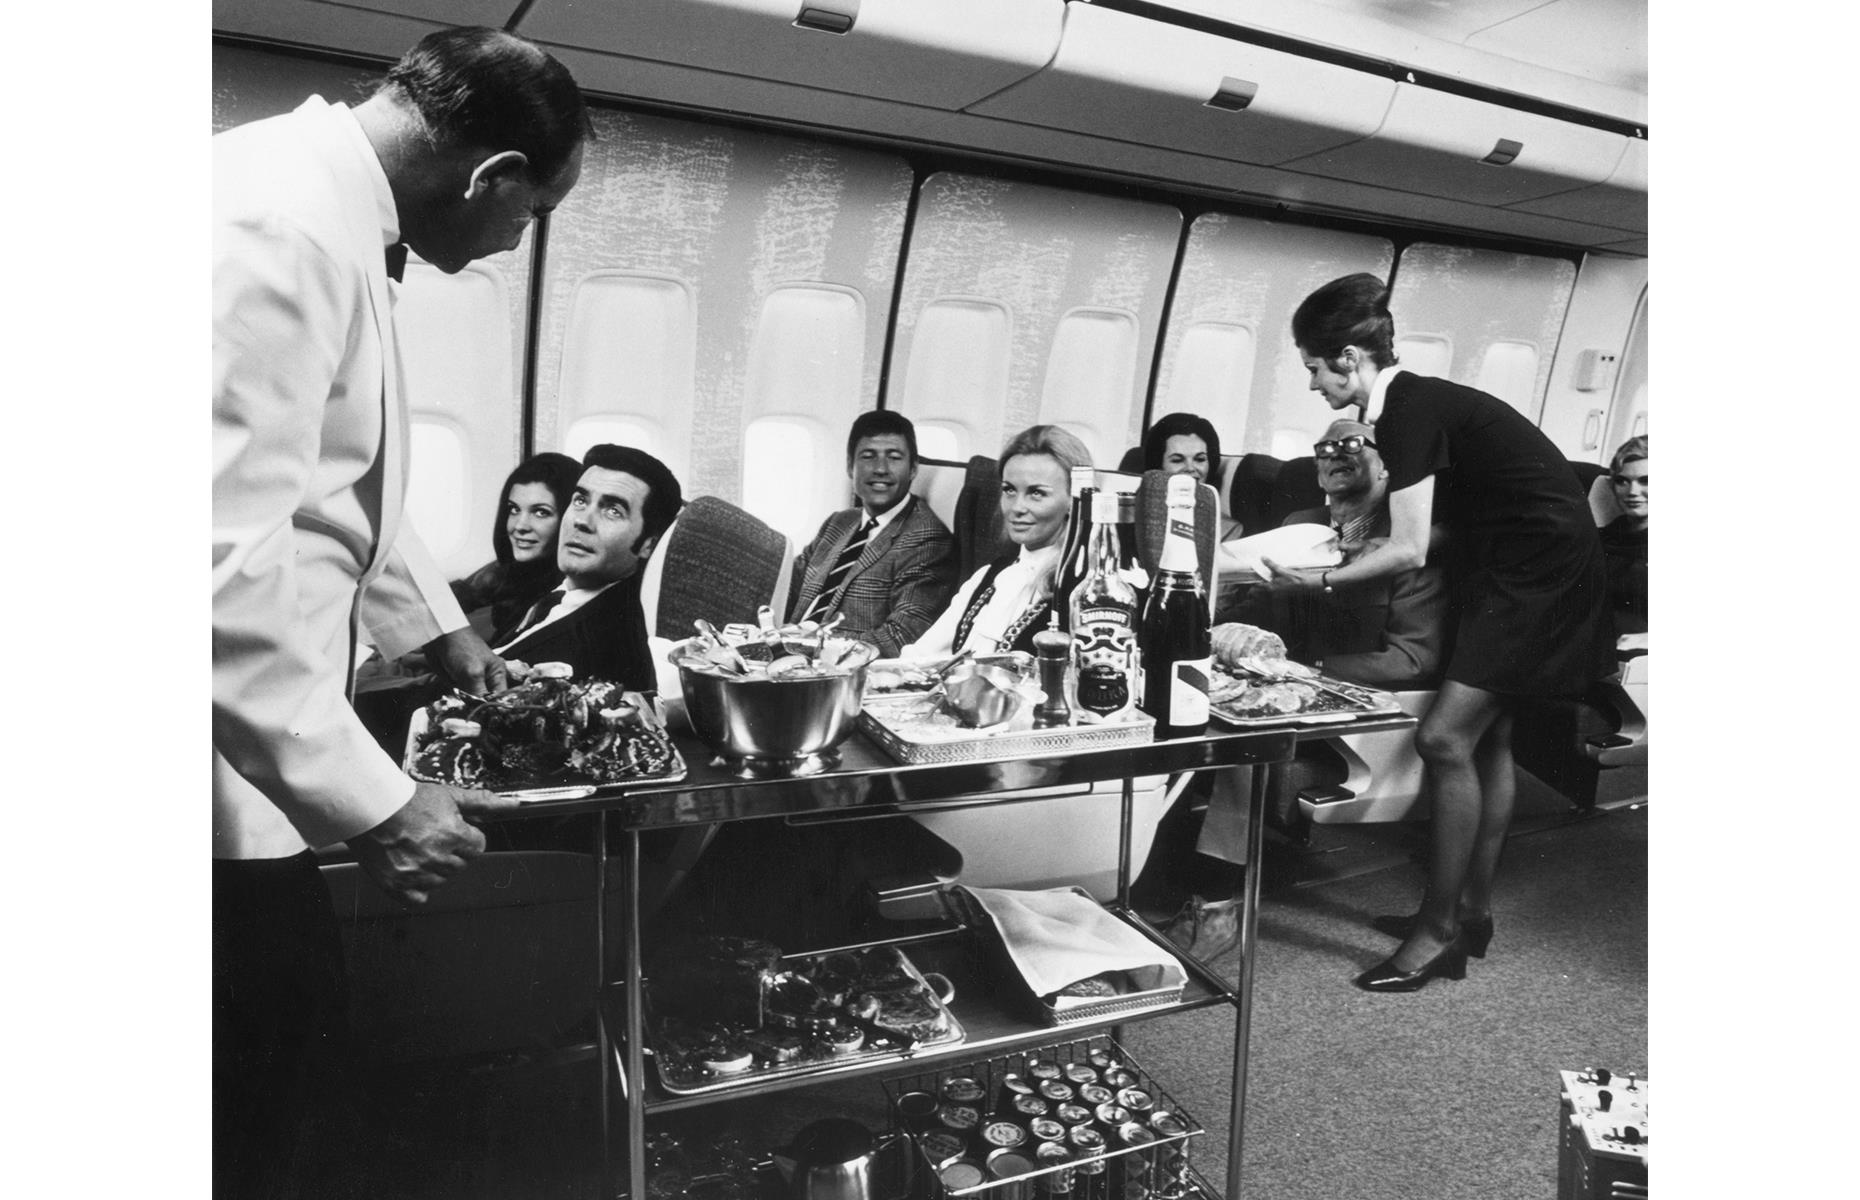 The long and lavish onboard lunches that characterized the "golden age of travel" weren't lost in the first-class cabin in the 1970s either. In this shot, taken on 22 January 1970, flight attendants carve ham seat-side, their trolley weighed down with bread and fine wine and spirits.